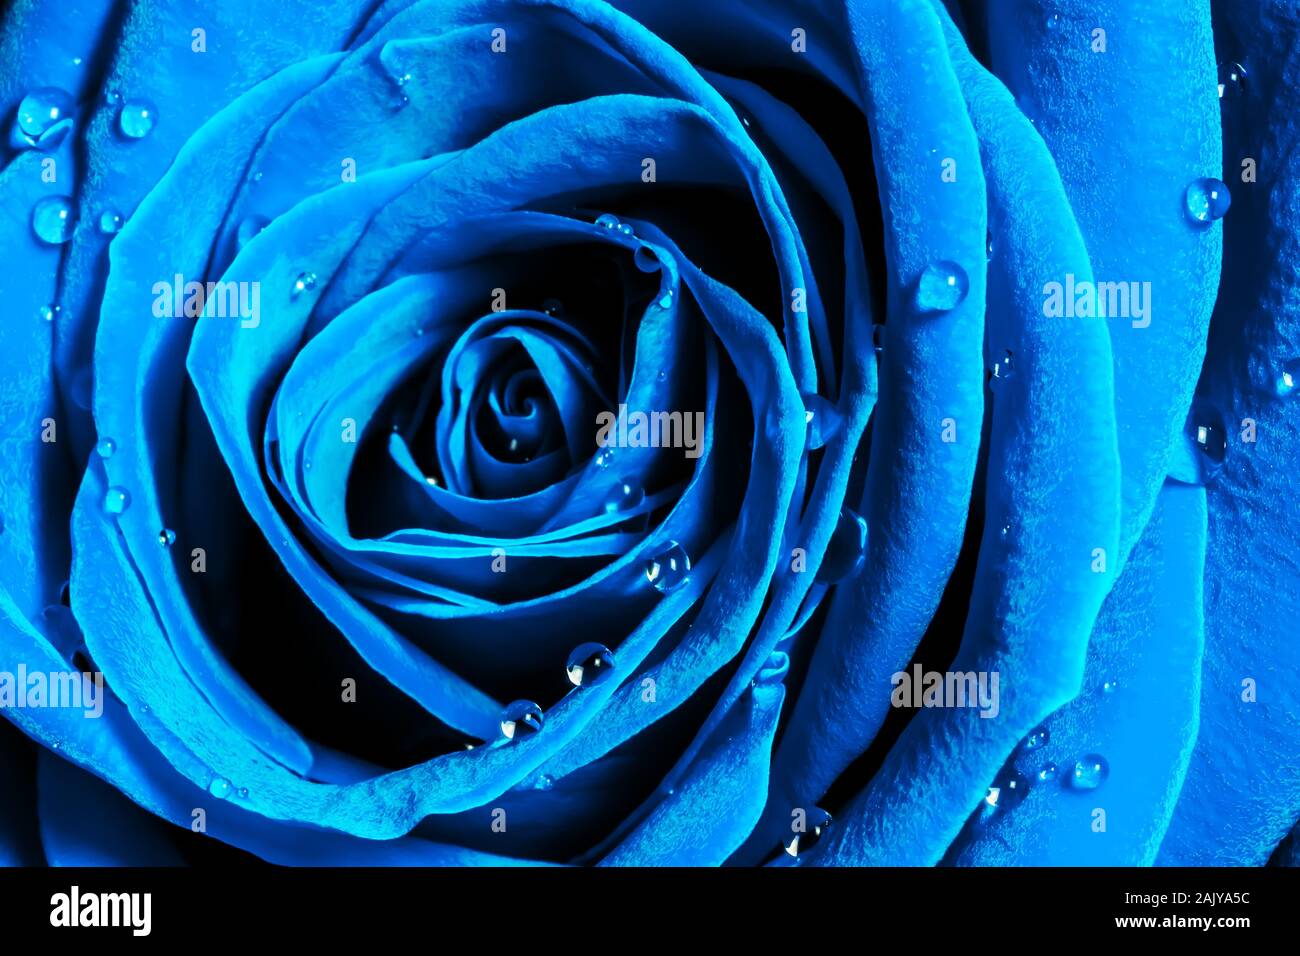 Creative Macro Photo Of A Rose Flower With Drops Of Water Close Up In The Color Trend In Dark Blue Colors Stock Photo Alamy